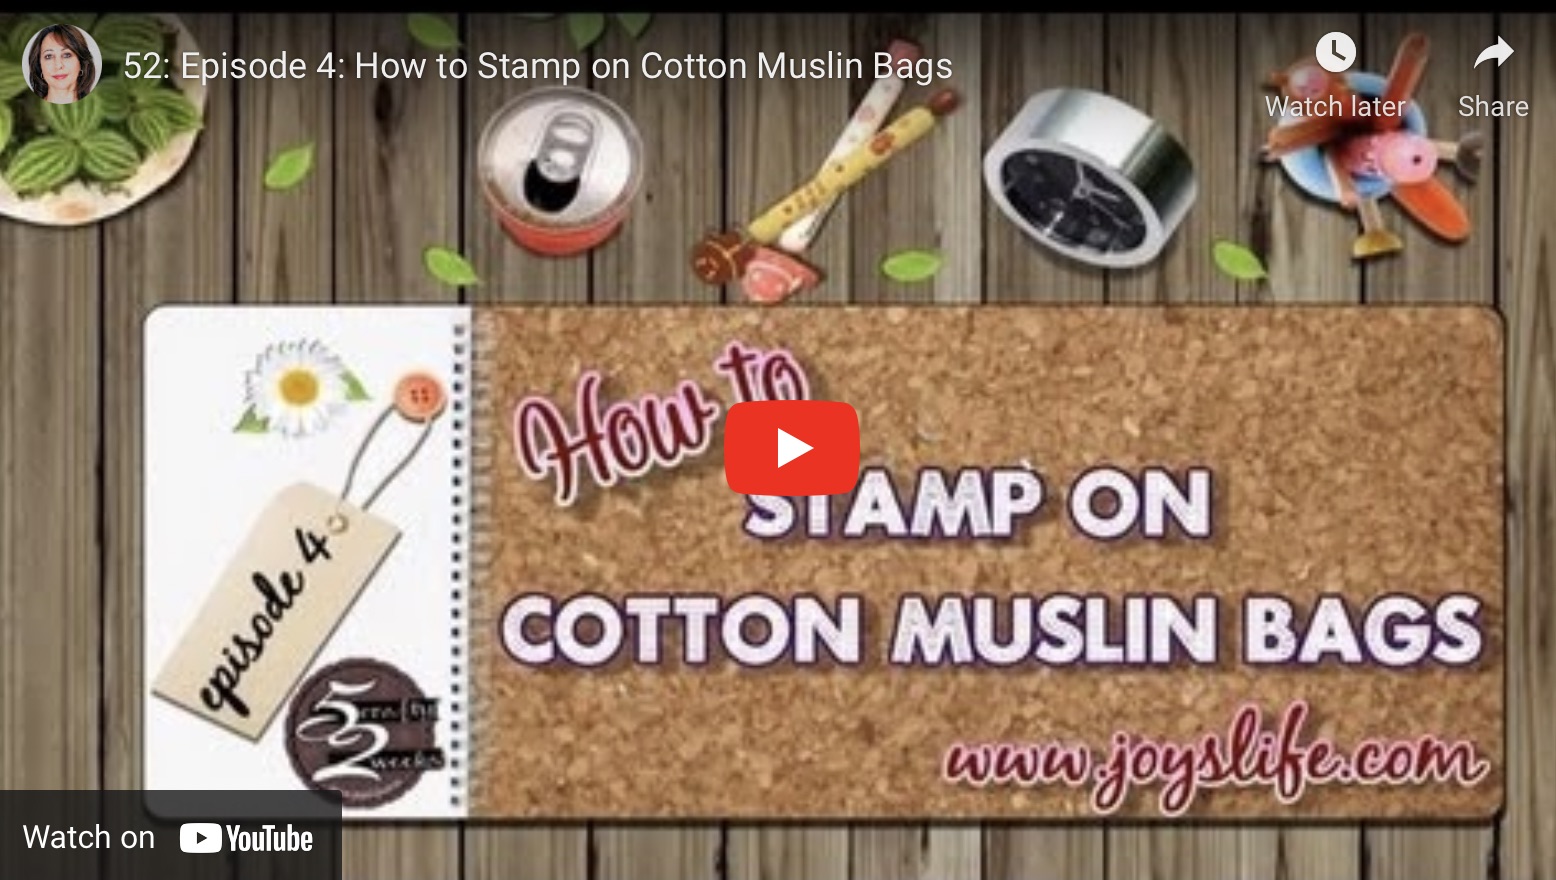 How to Stamp on Cotton Muslin Bags